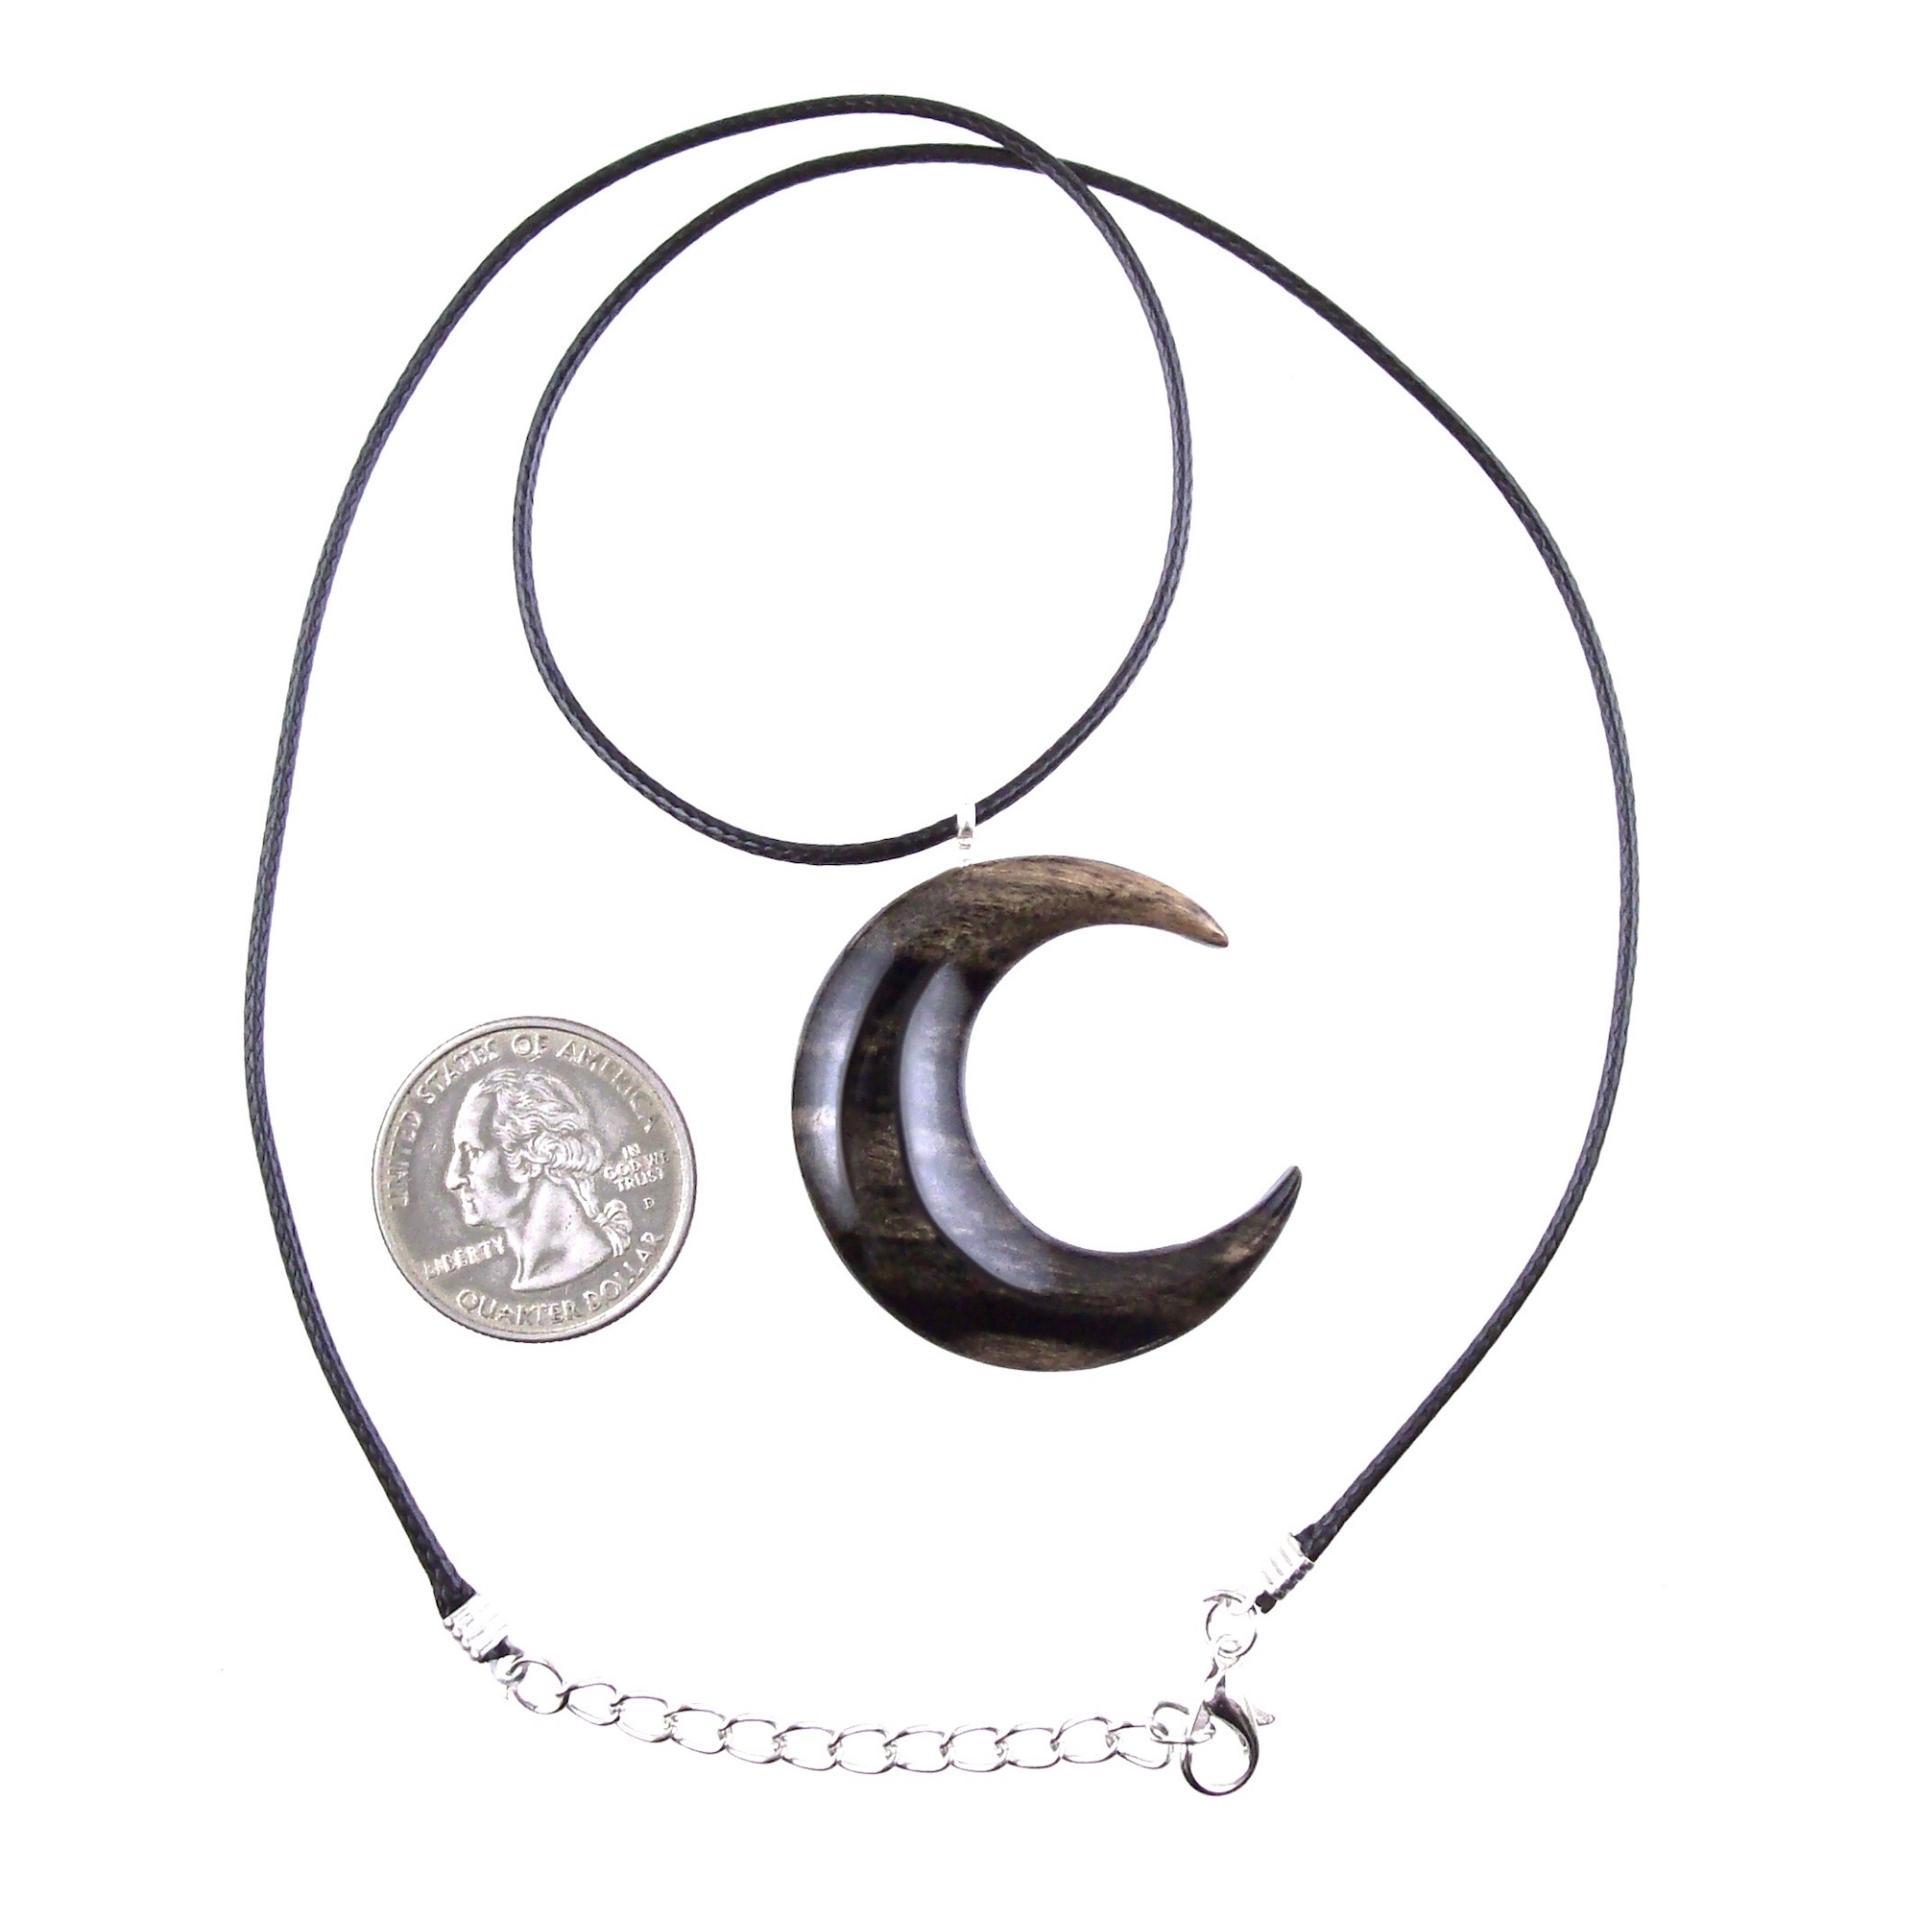 Hand Carved Moon Necklace, Wooden Crescent Moon Pendant, Wood Celestial Necklace, Pagan Lunar Jewelry for Men or Women